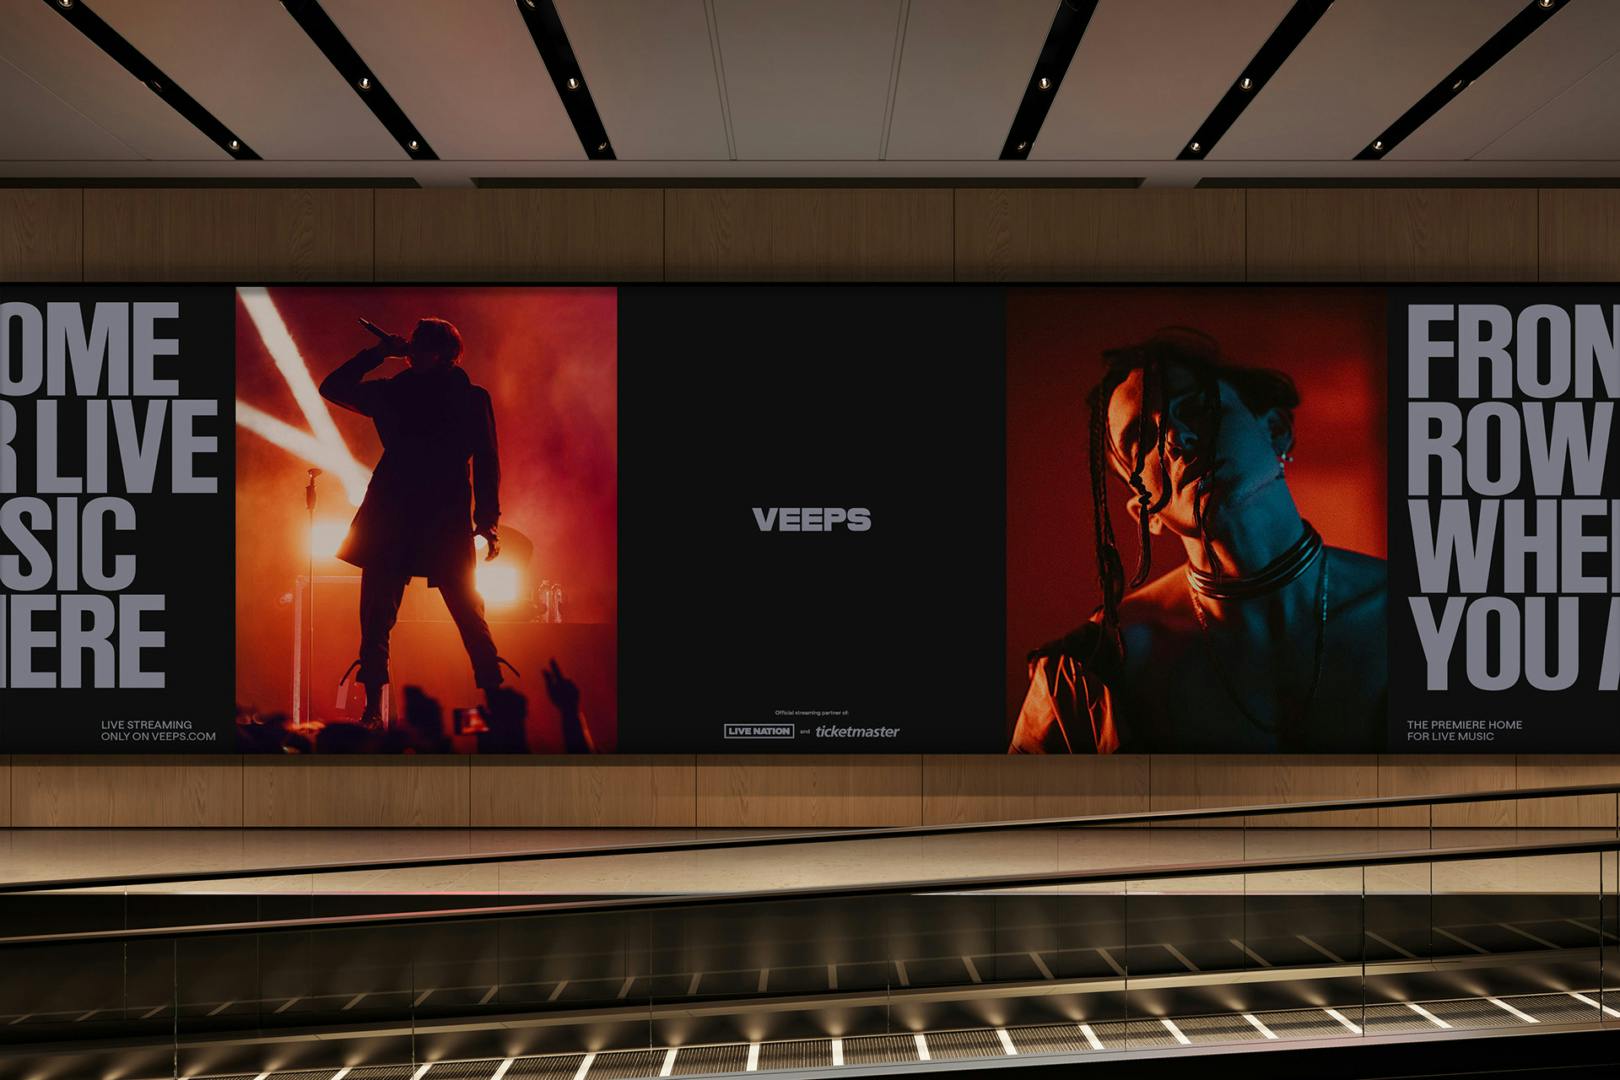 Outdoor adverts for Veeps featuring photos of music artists and slogans including 'the home for live music is here' and 'front row where you are'